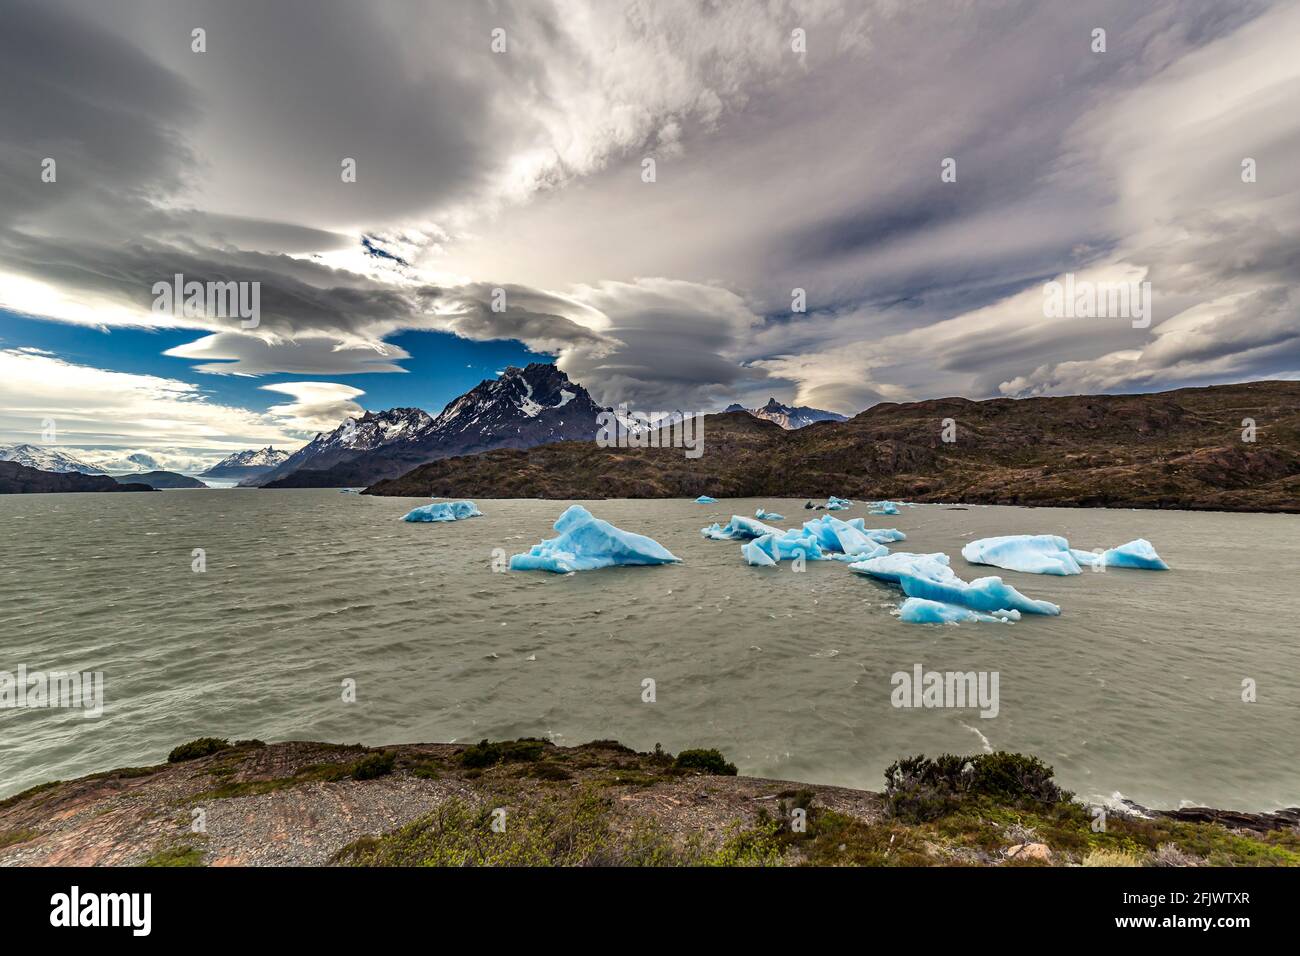 View of glacier at Lake grey and Isla de Los Hielos, Torres del Paine National Park, in Chile, South America Stock Photo